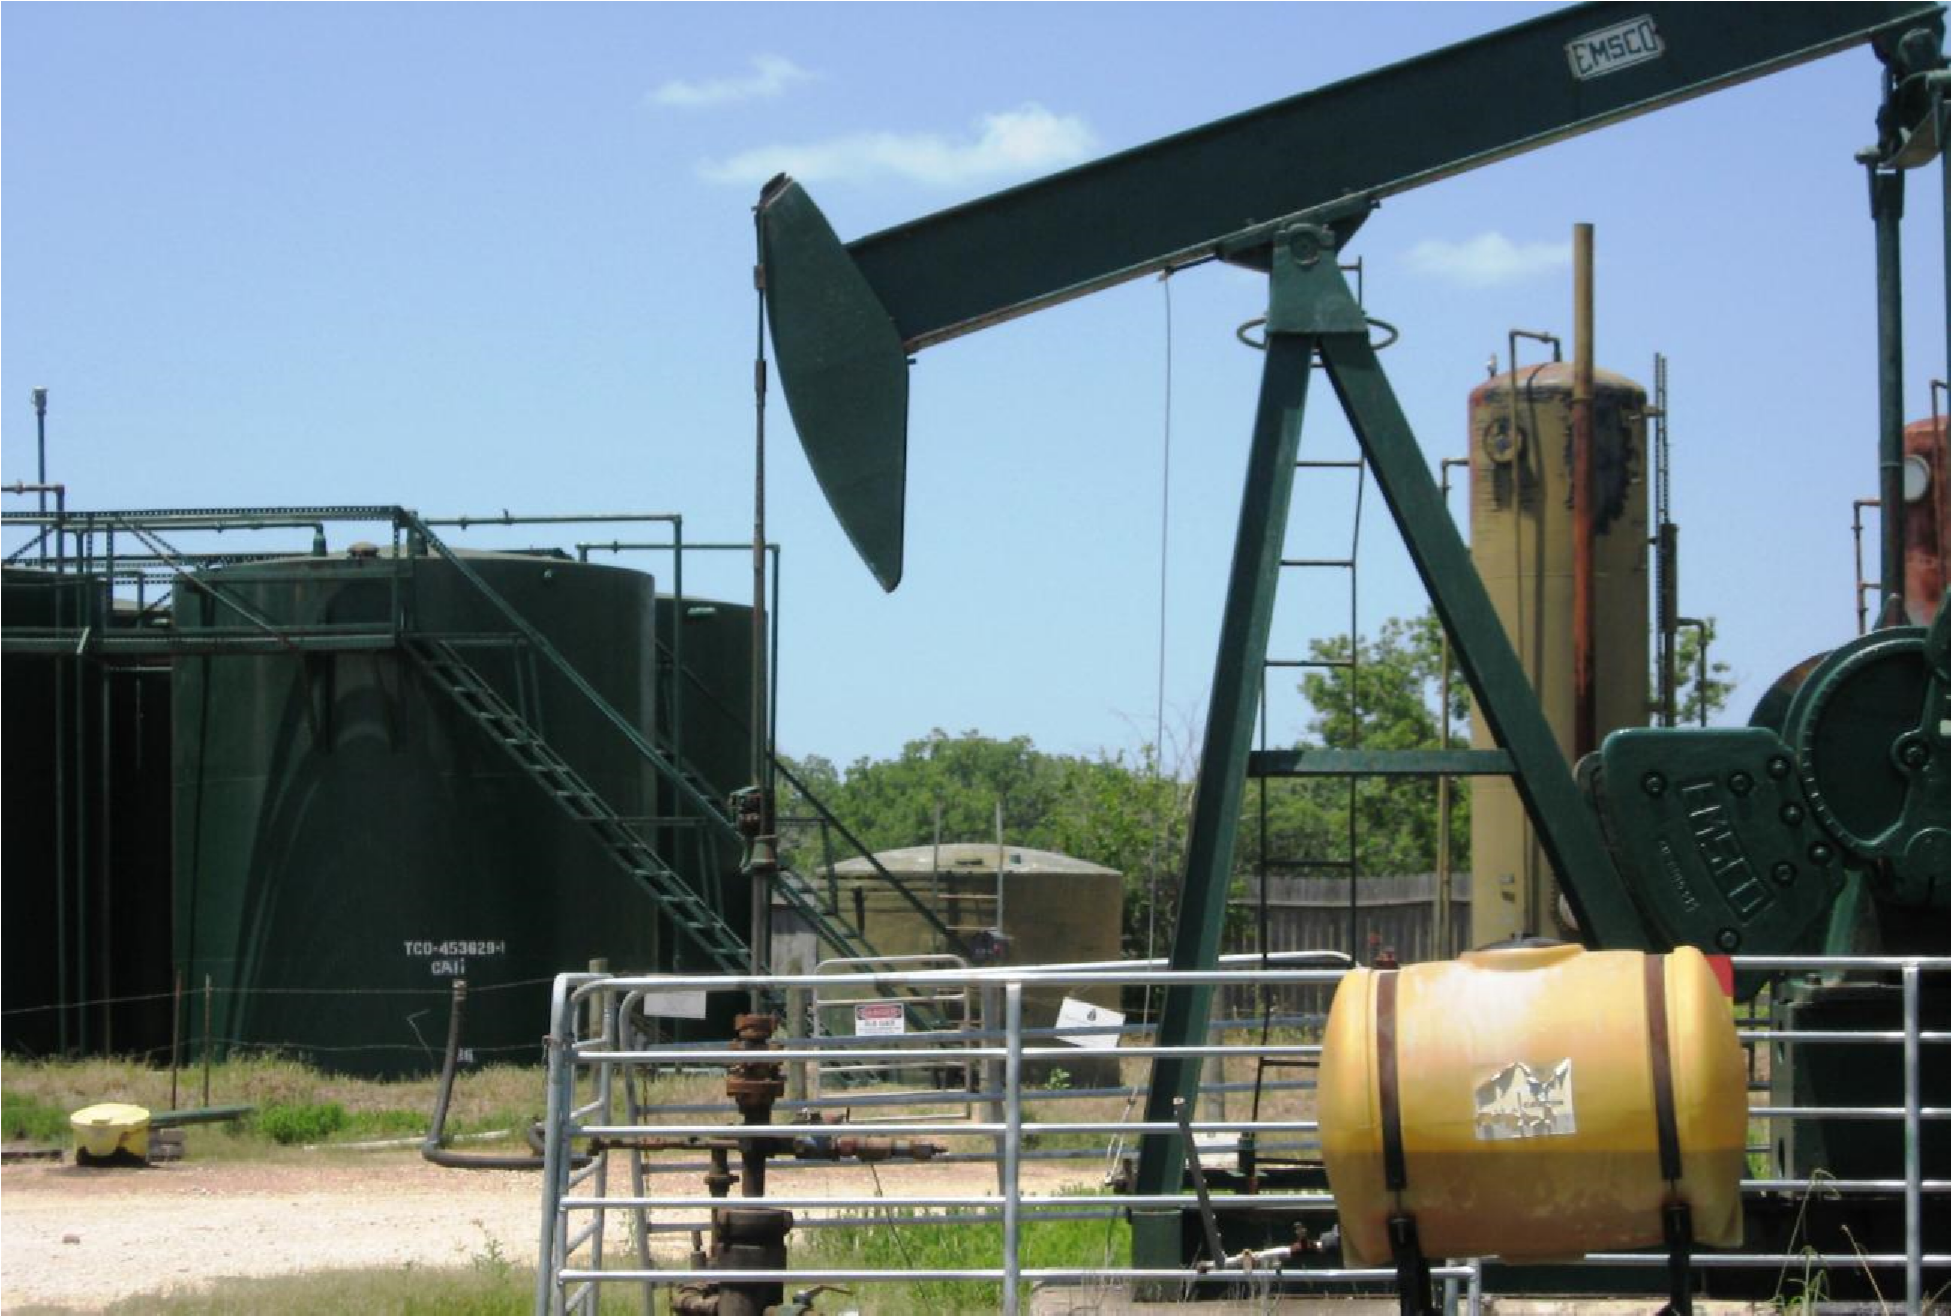 Rancho-Cali 2 Well in Texas Open for Investors